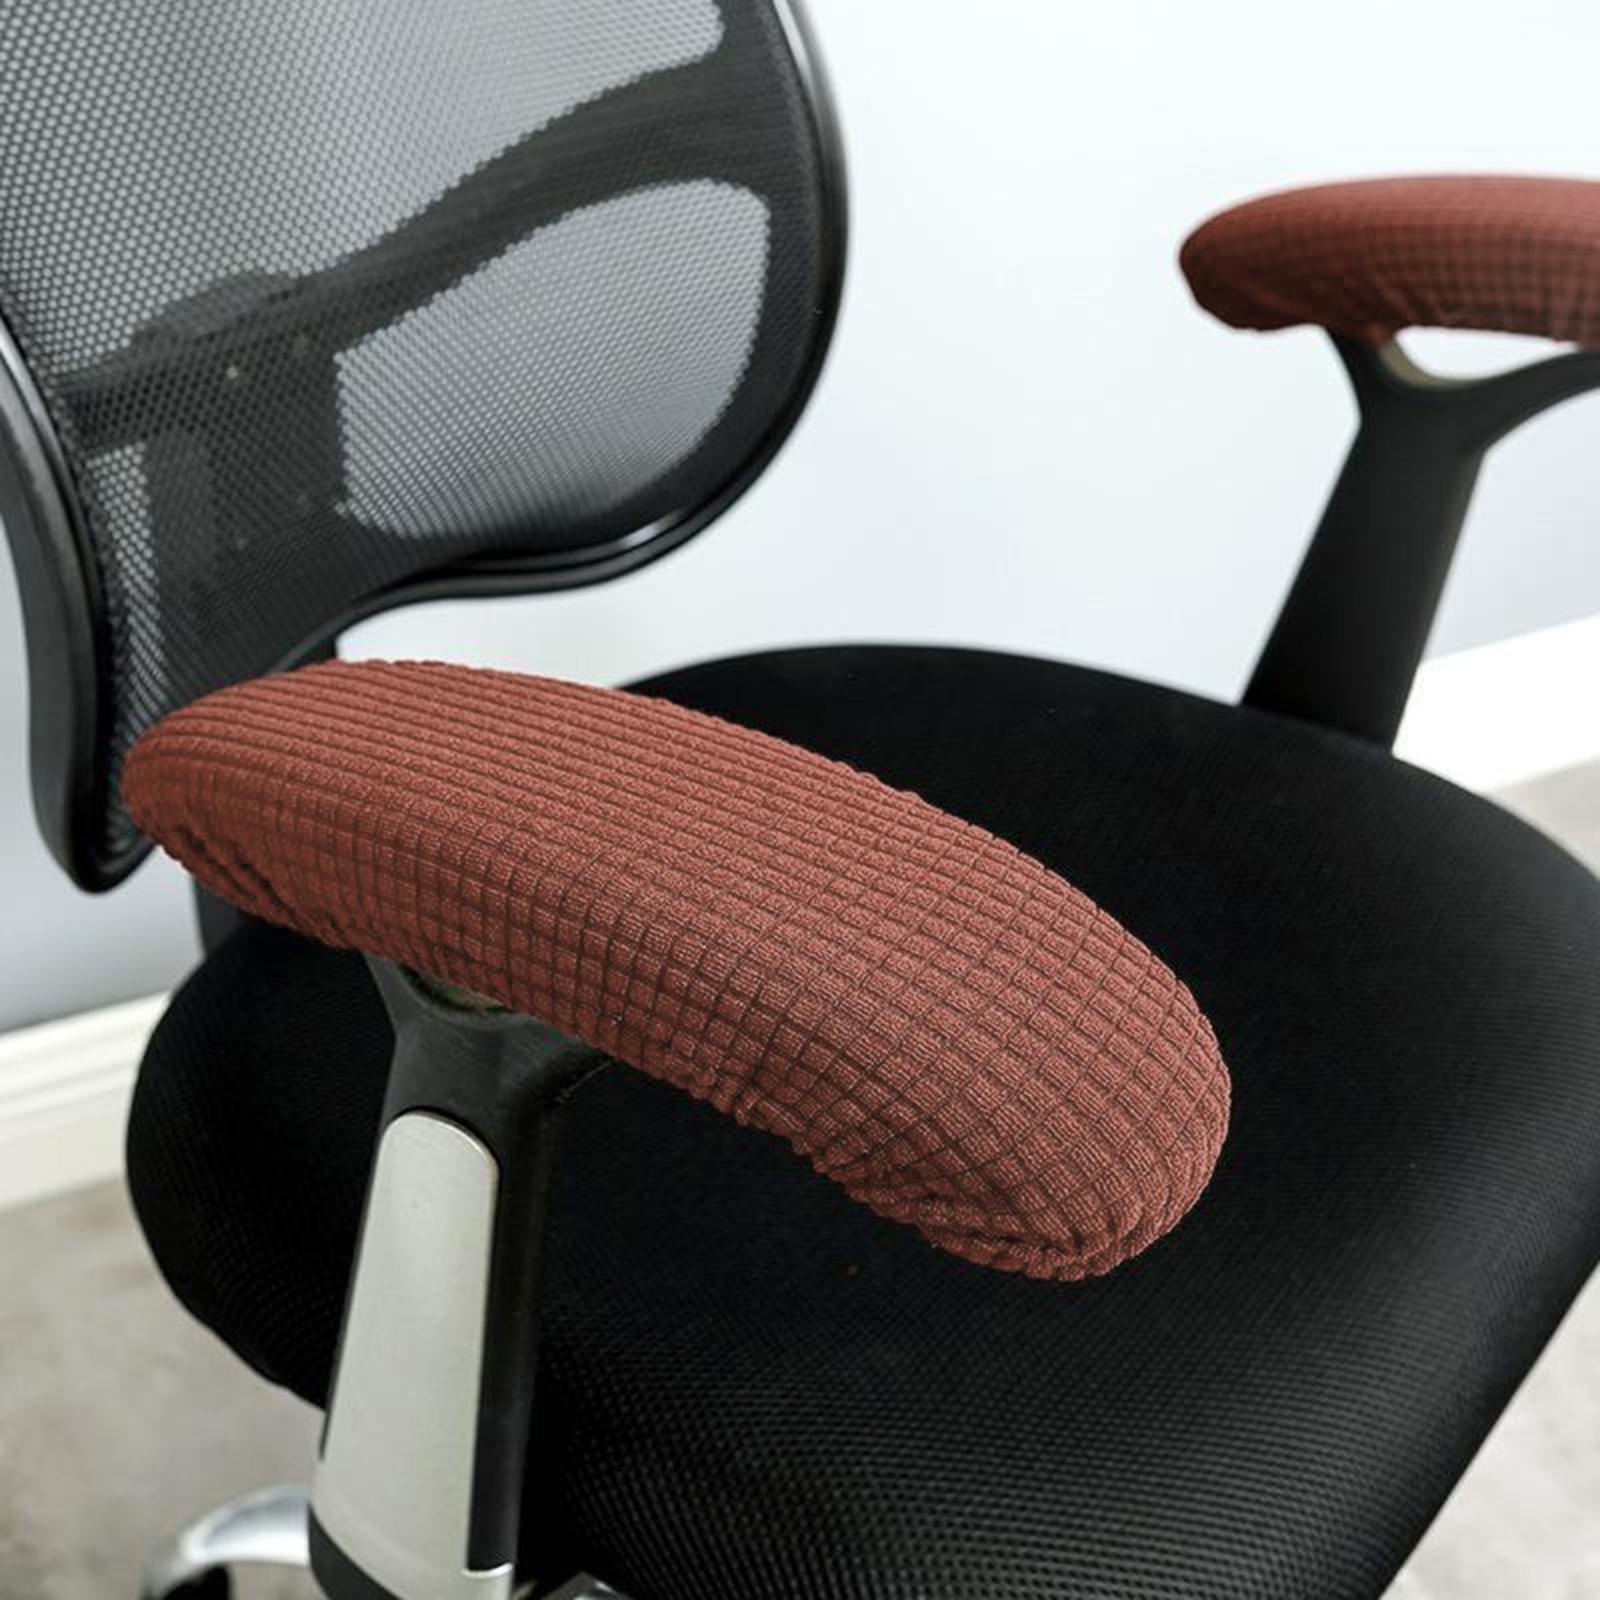 2pcs Office Gaming Chair Armrest Covers Cushions Pads Desk Chair Arm Cover - Coffee, 25-33cm, Brown